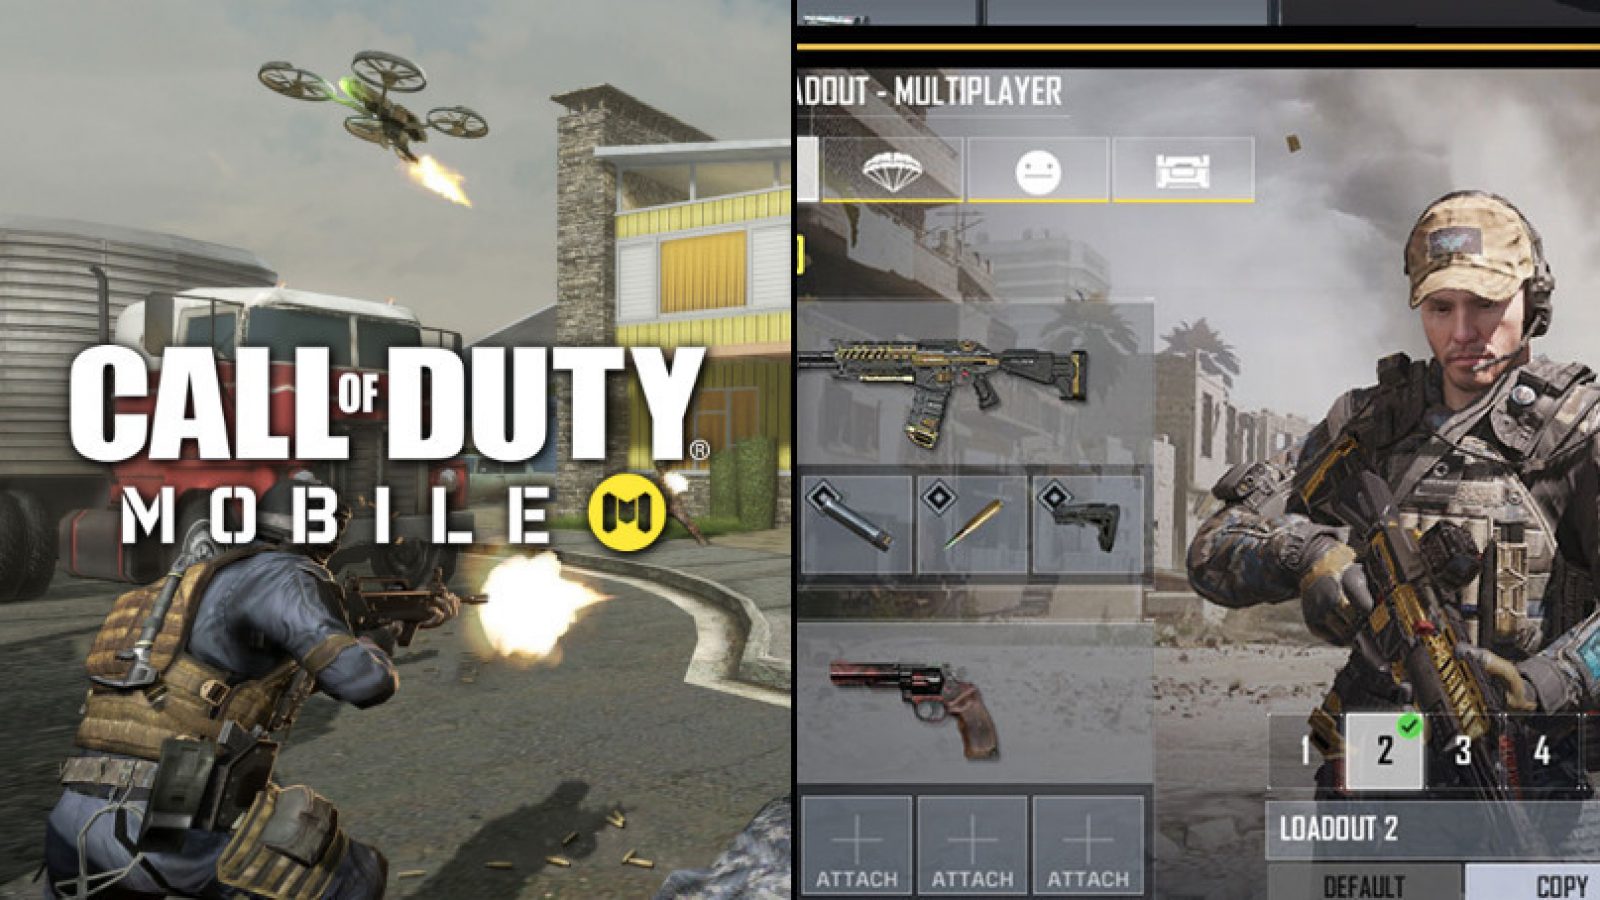 All the Advantages and Operator Skills in Call of Duty Mobile!